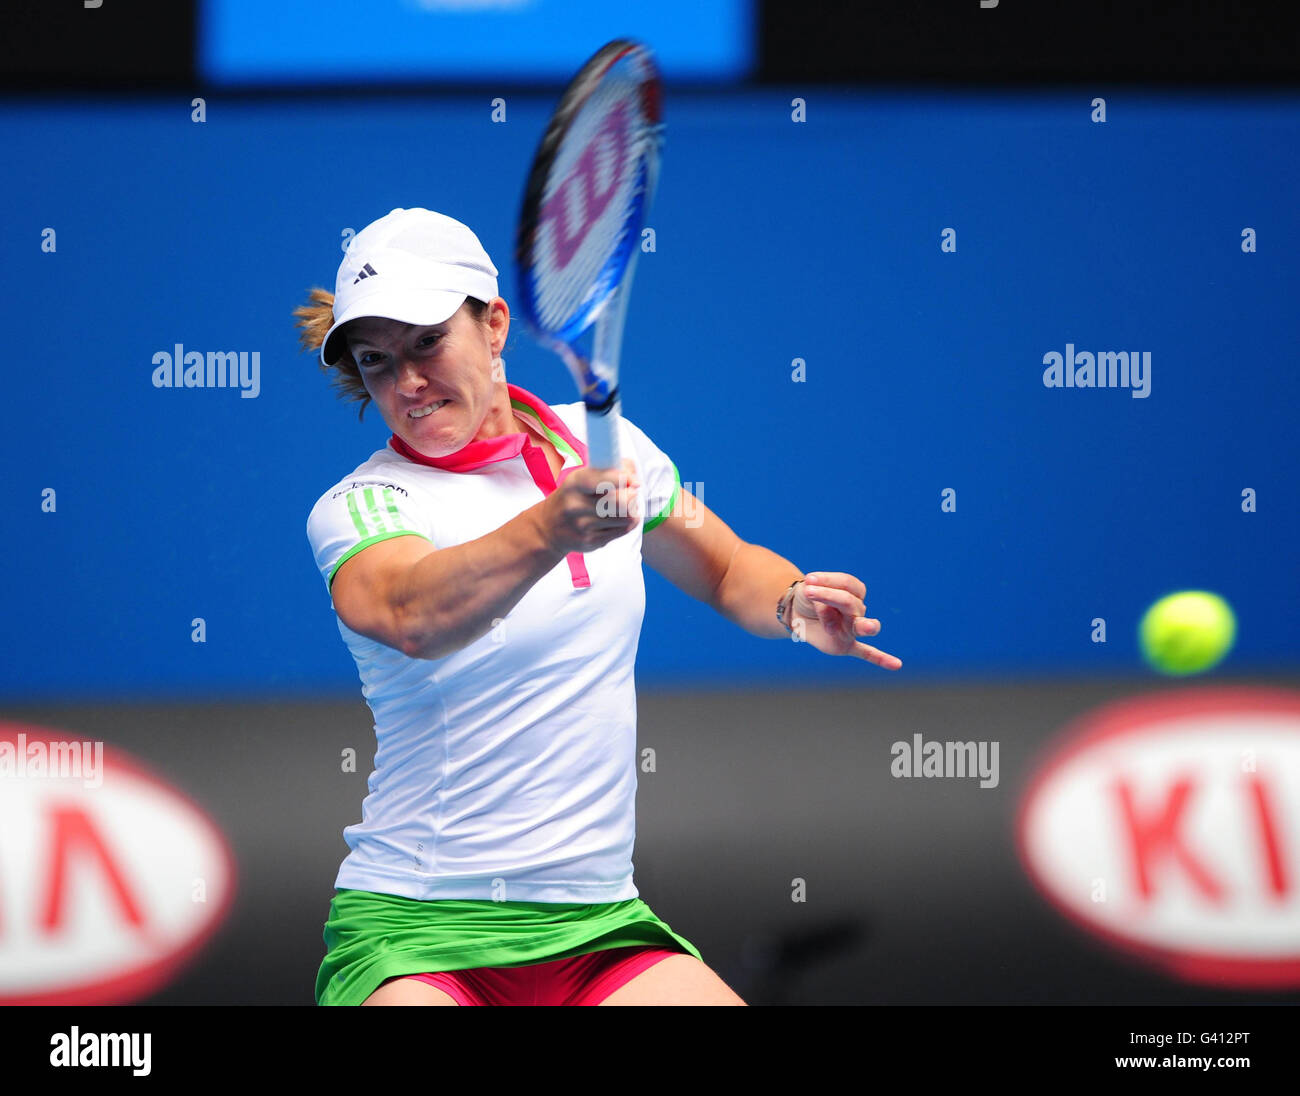 Belgium's Justine Henin in action against Great Britain's Elena Baltacha during day three of the 2011 Australian Open at Melbourne Park in Melbourne, Australia. Stock Photo